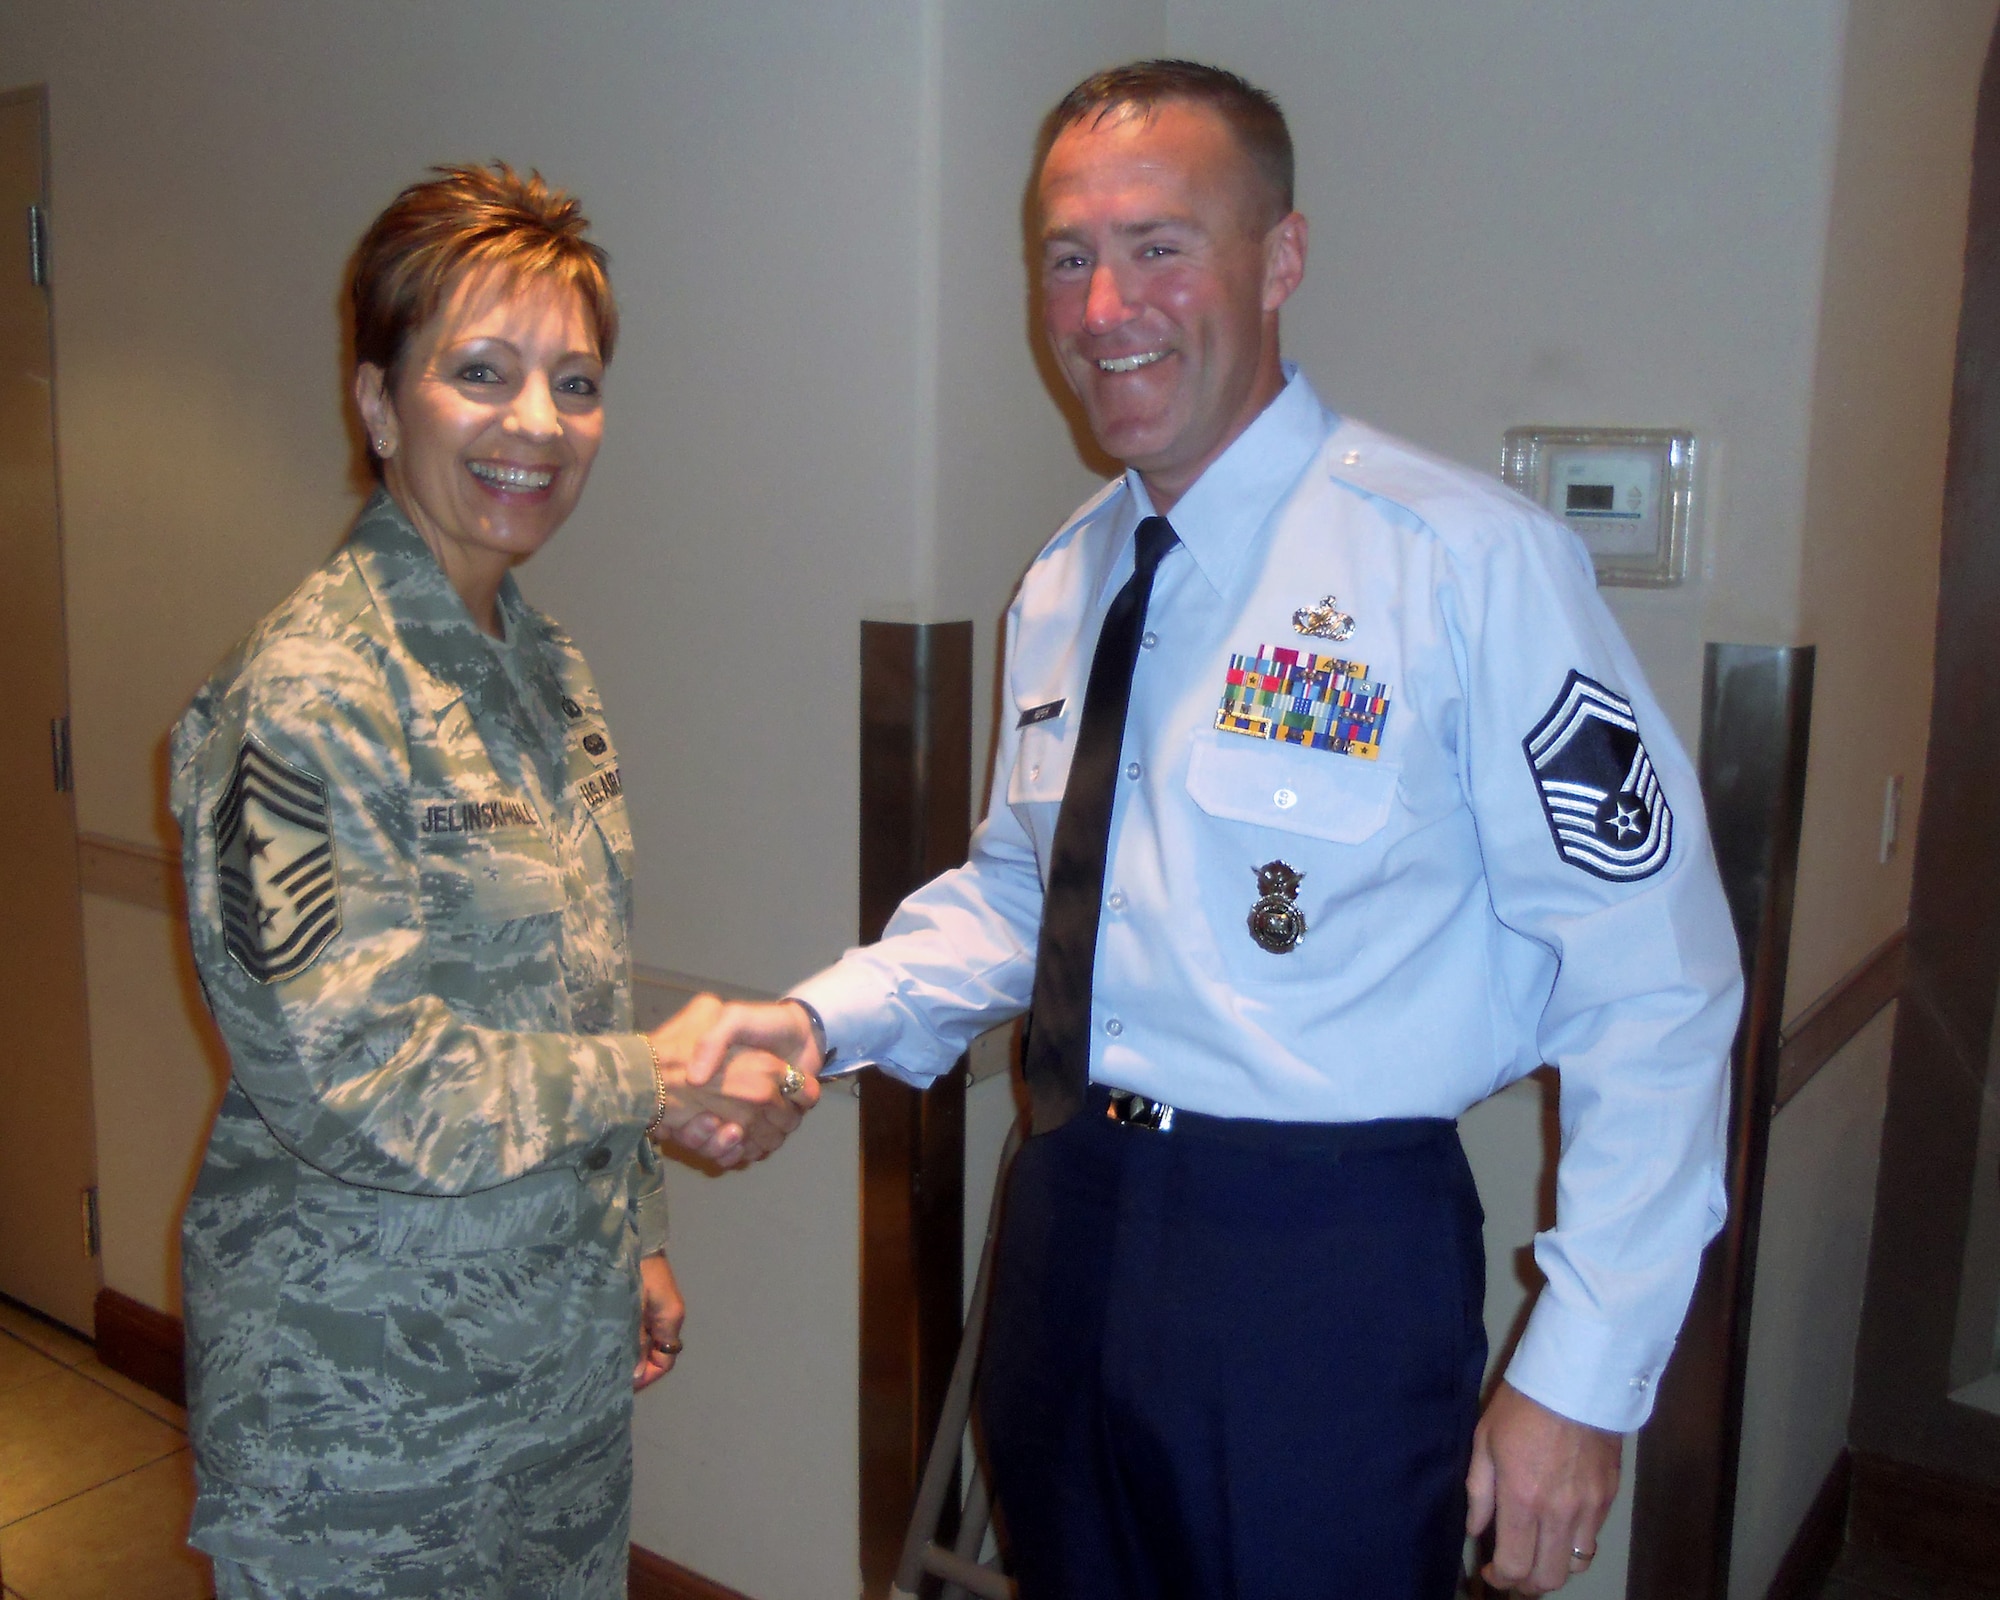 U.S. Air Force Command Chief Master Sgt. Denise Jelinski-Hall, Air Force Senior Enlisted Advisor hands Oregon Air National Guard Senior Master Sgt. Christopher Roper, one of her coins prior to his graduation ceremony from the U.S. Army Sergeant Major Academy on June 17, 2011 at Ft. Bliss, Tex. (Photograph courtesy of Senior Master Sgt. Christopher Roper)
